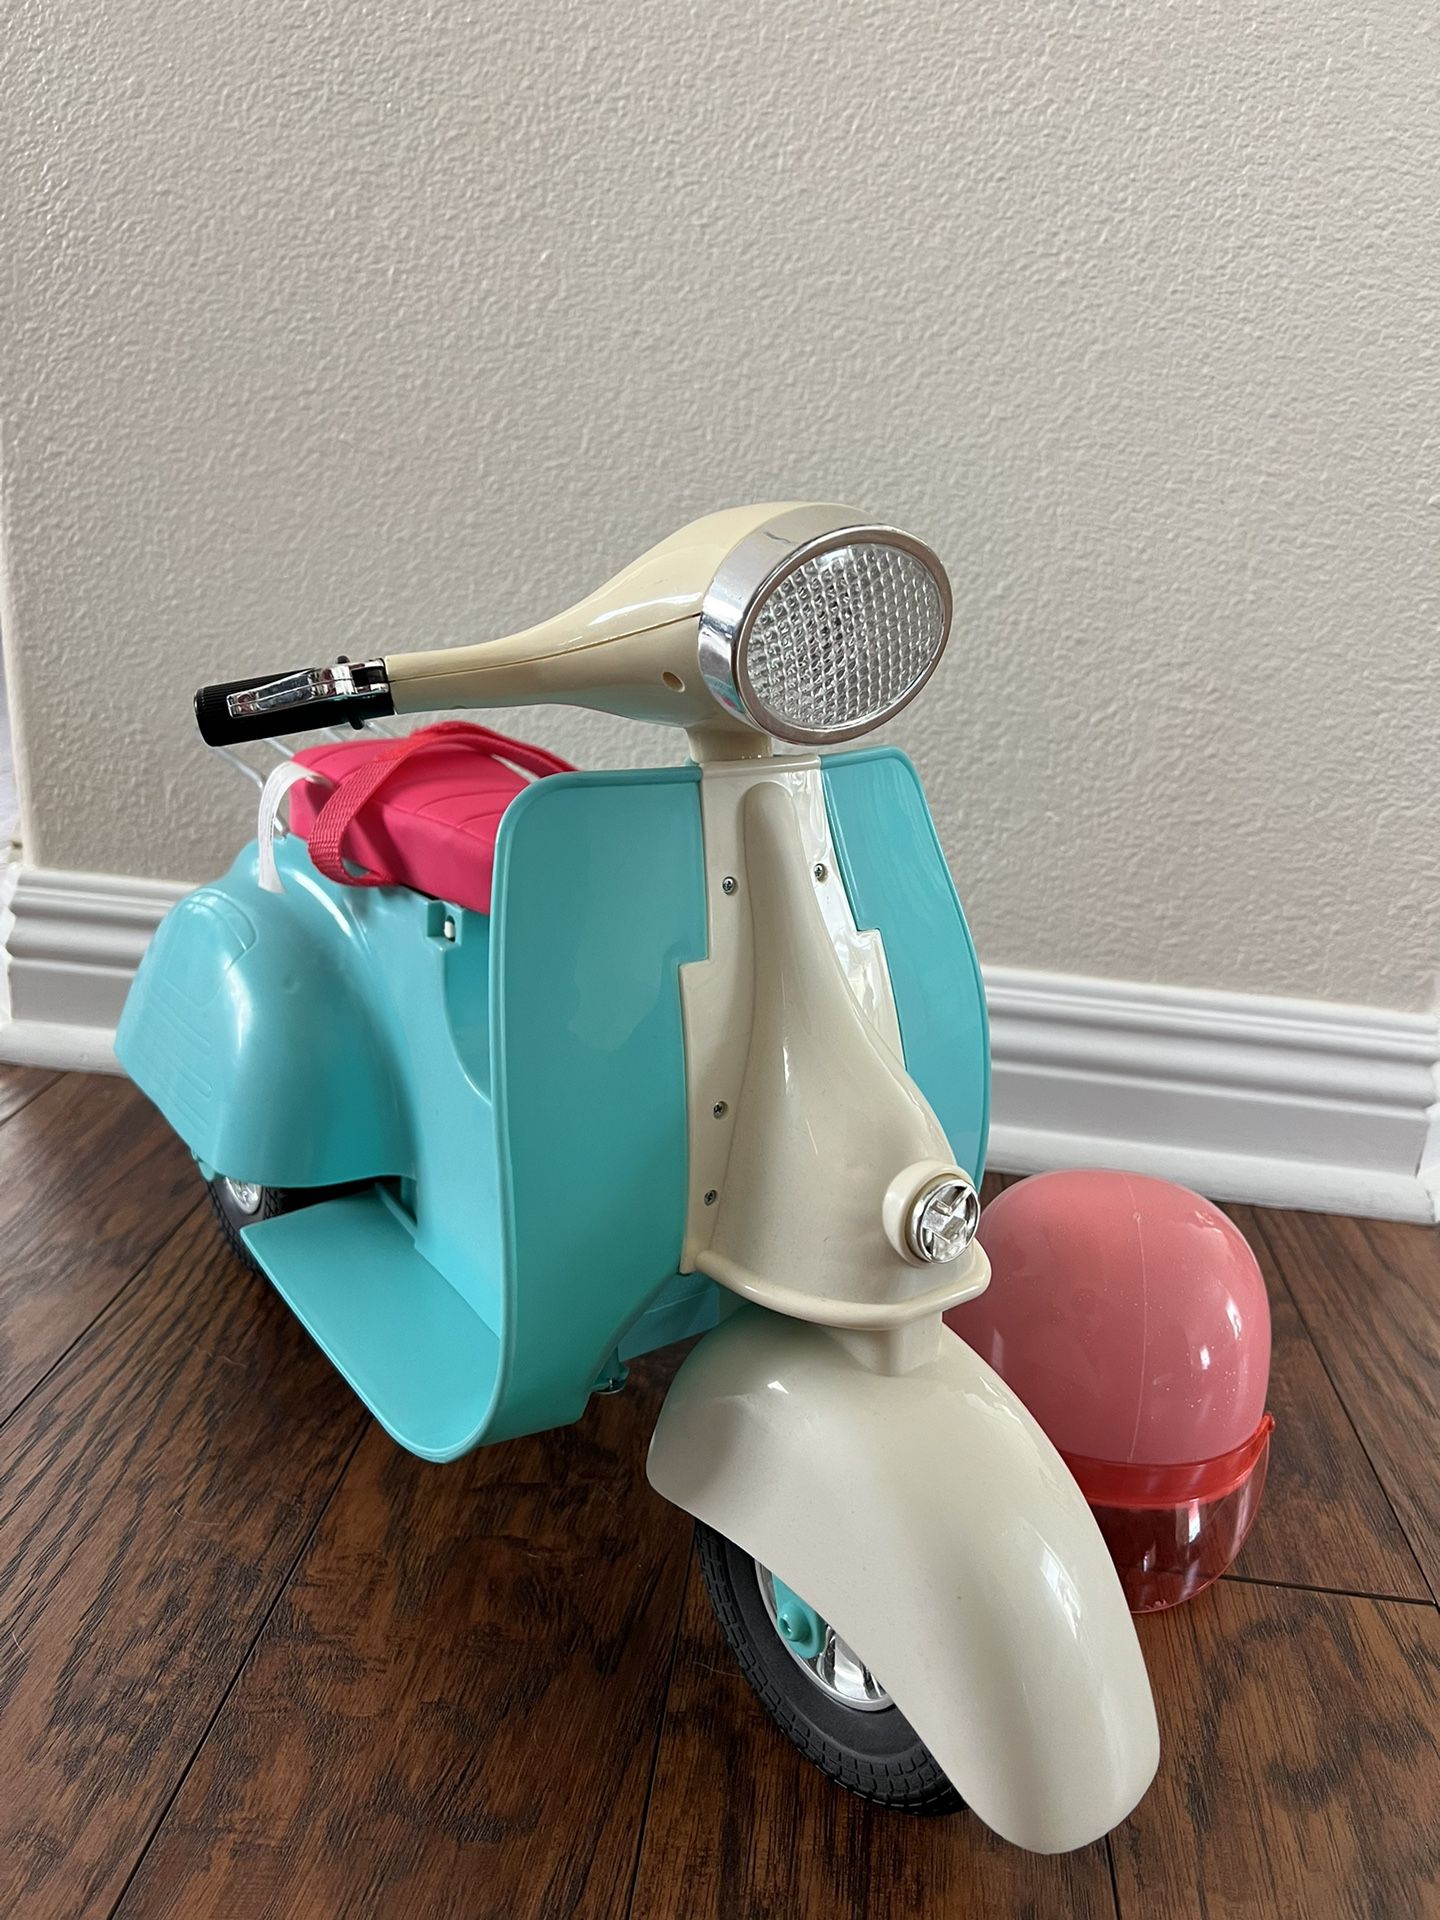 Our Generation Doll Scooter Sale Trabuco Canyon, CA - OfferUp